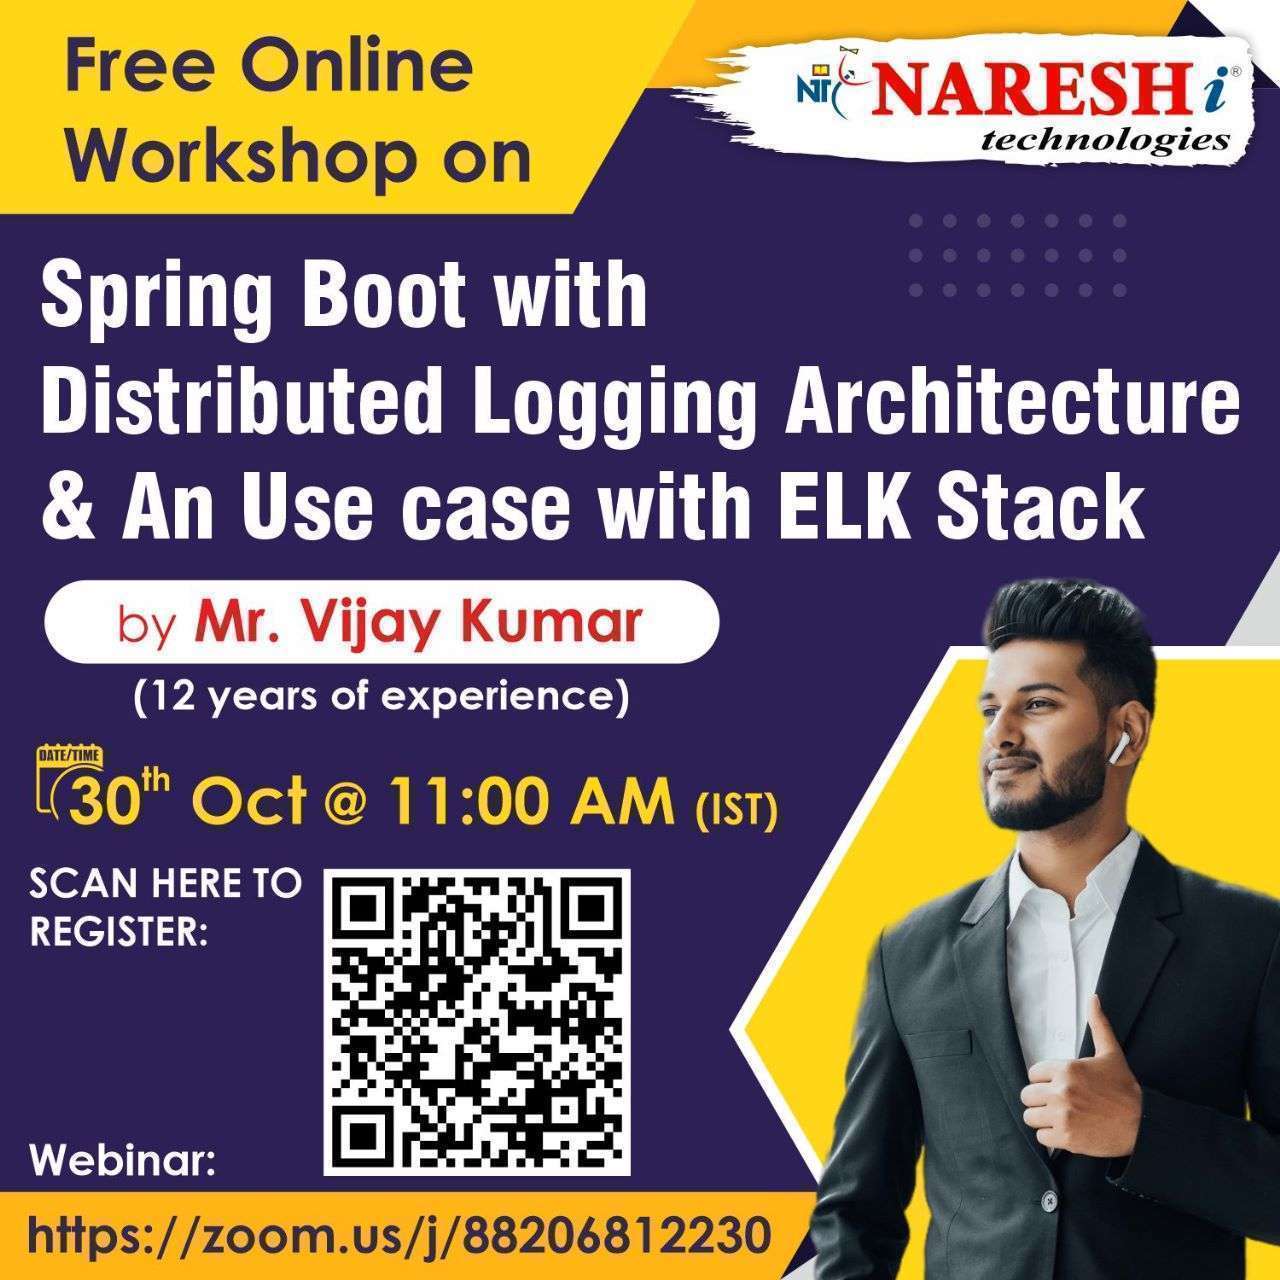 Free Workshop On Springboot Course Training in NareshIT